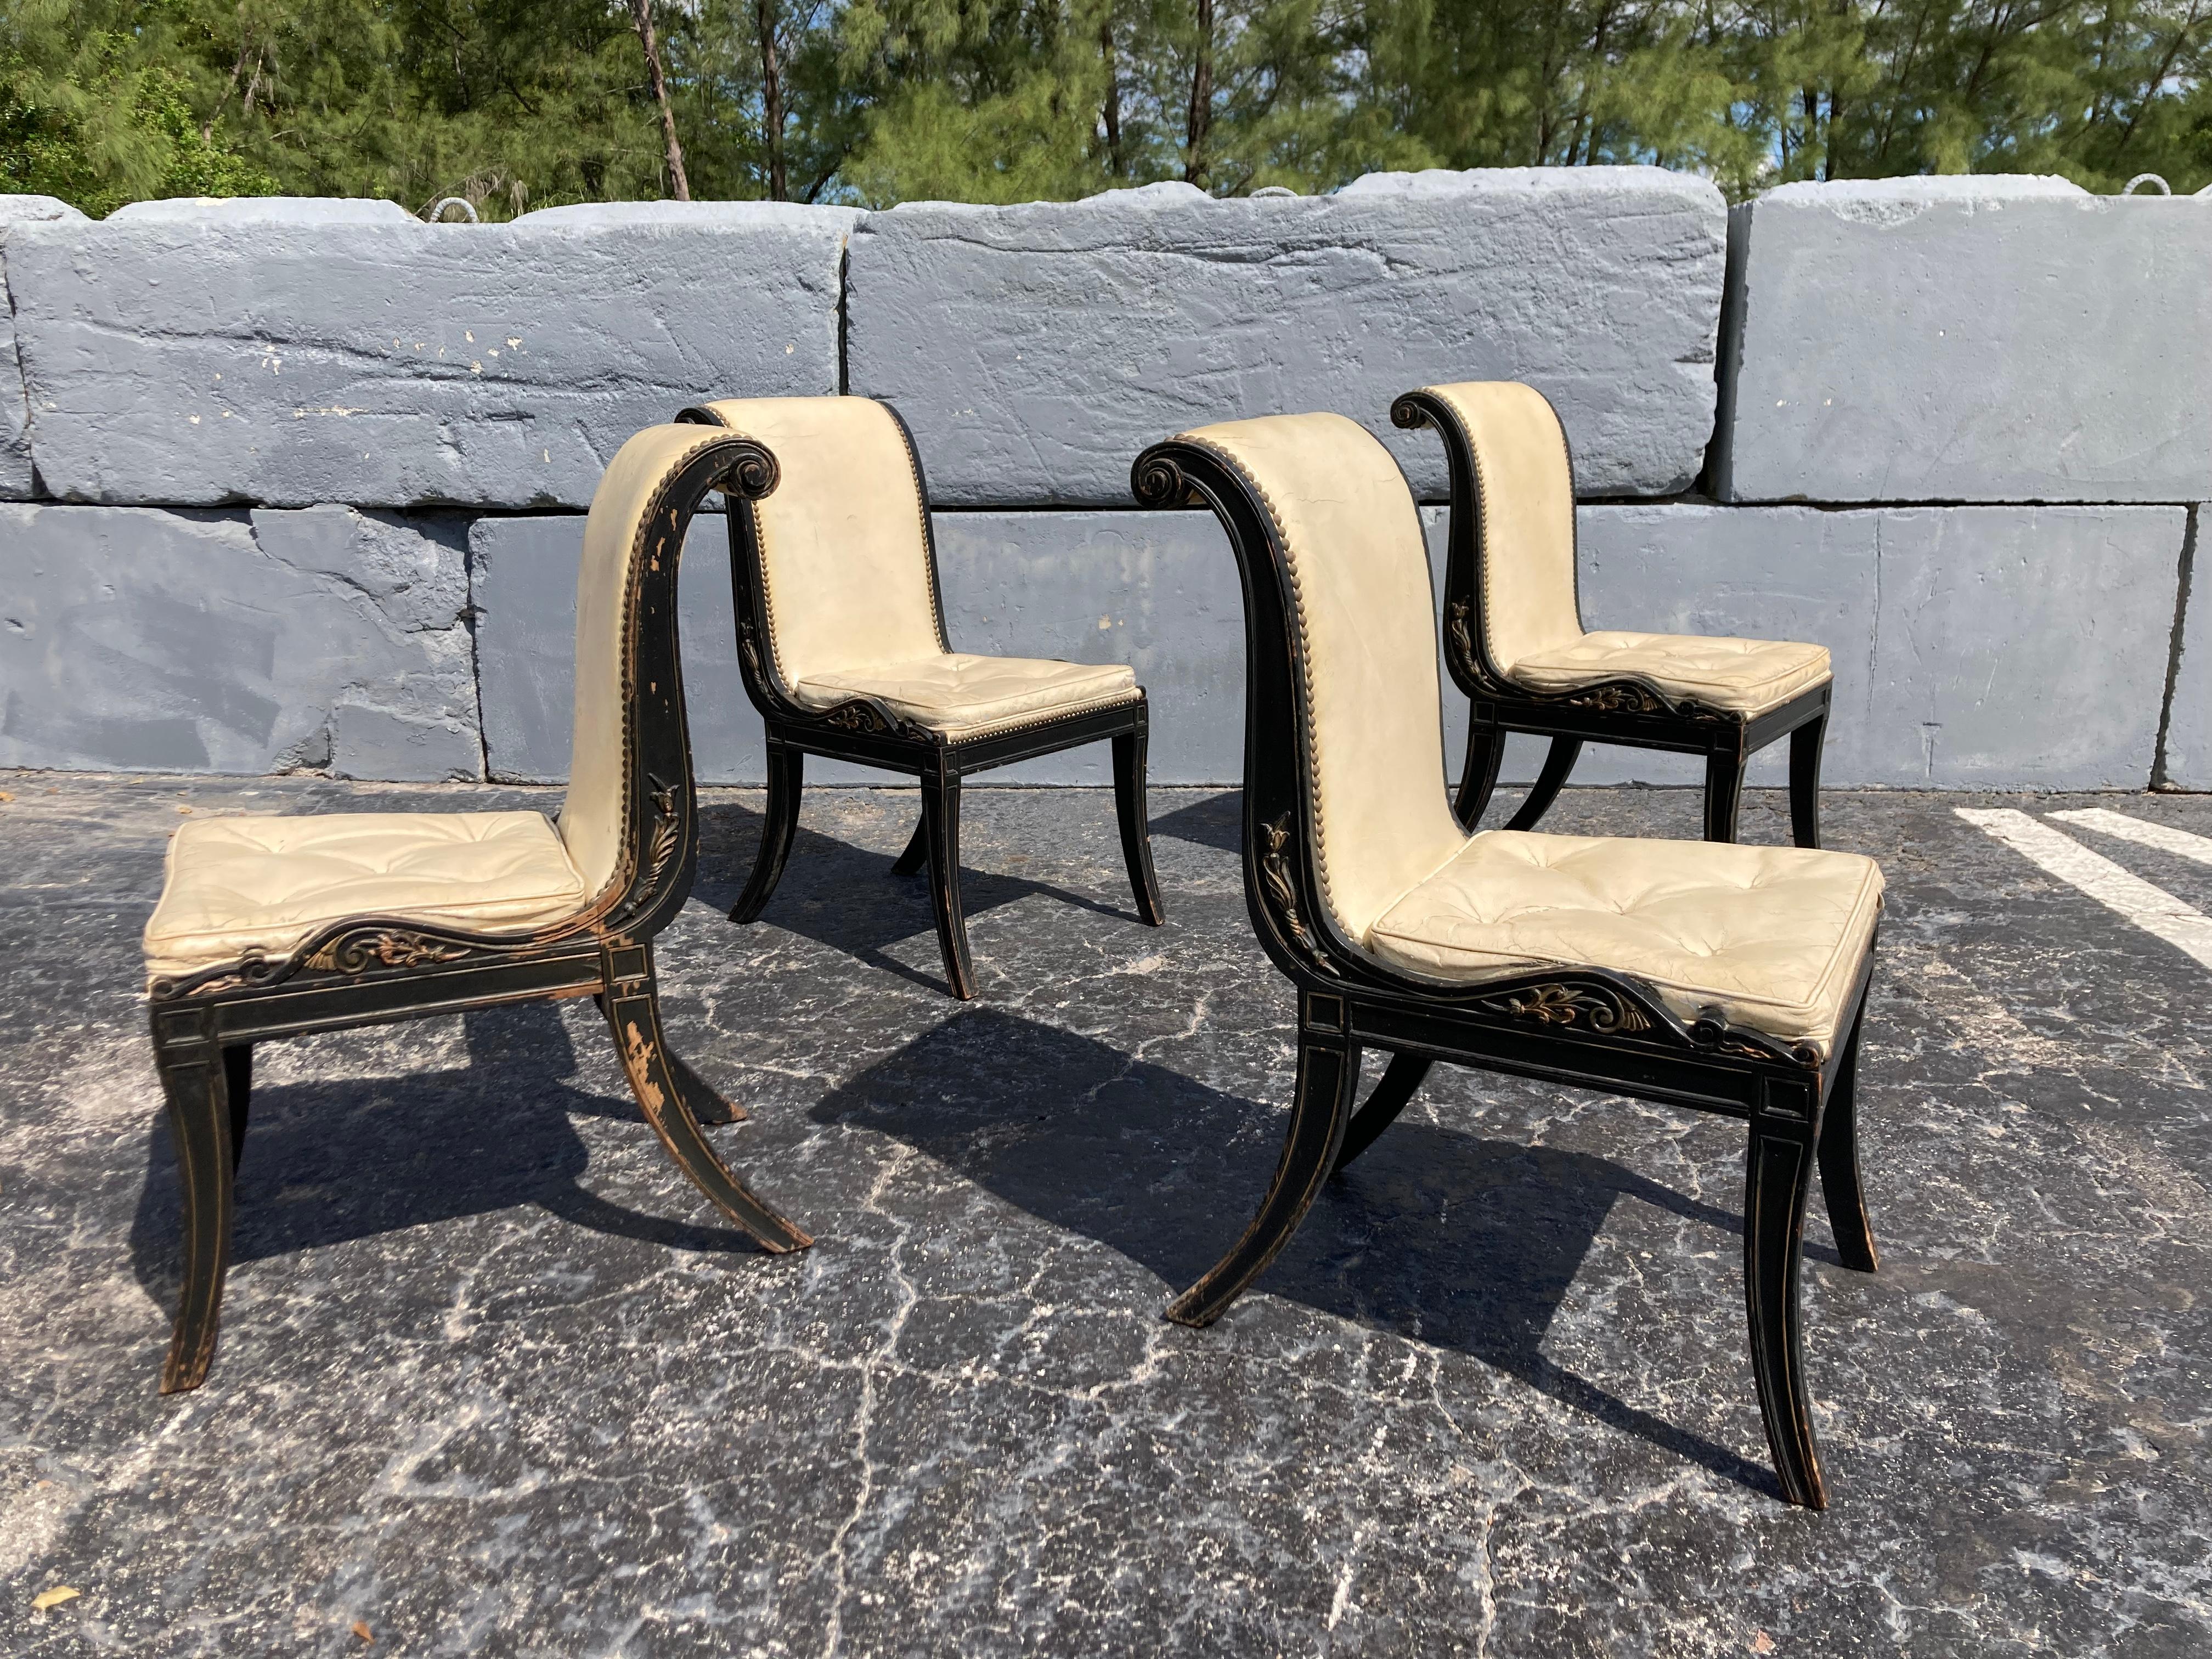 Stunning Antique Chairs For Sale 9